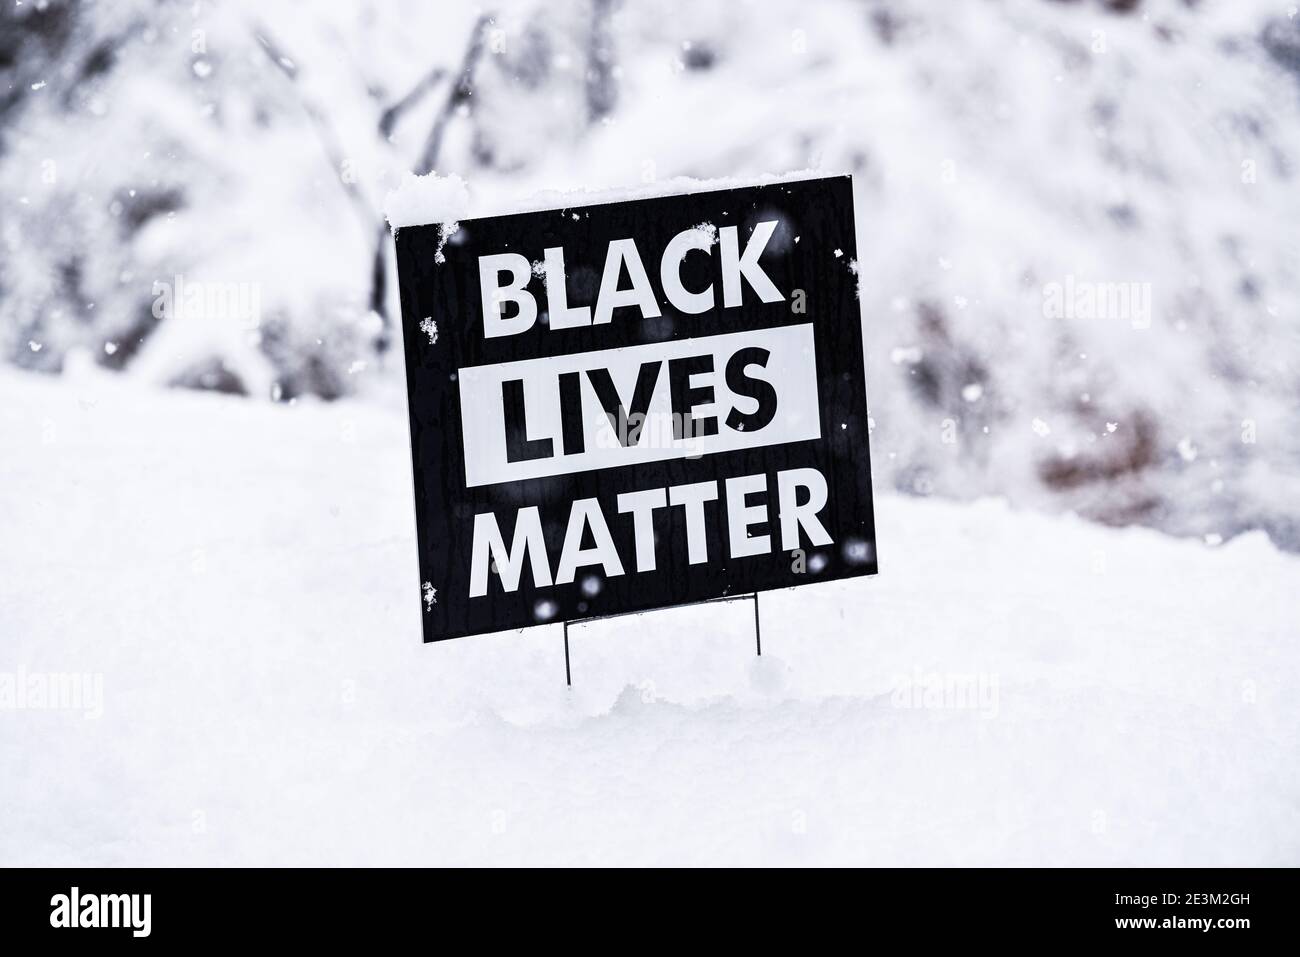 Dramatic image of Black Lives Matter sign in the snow. Stock Photo